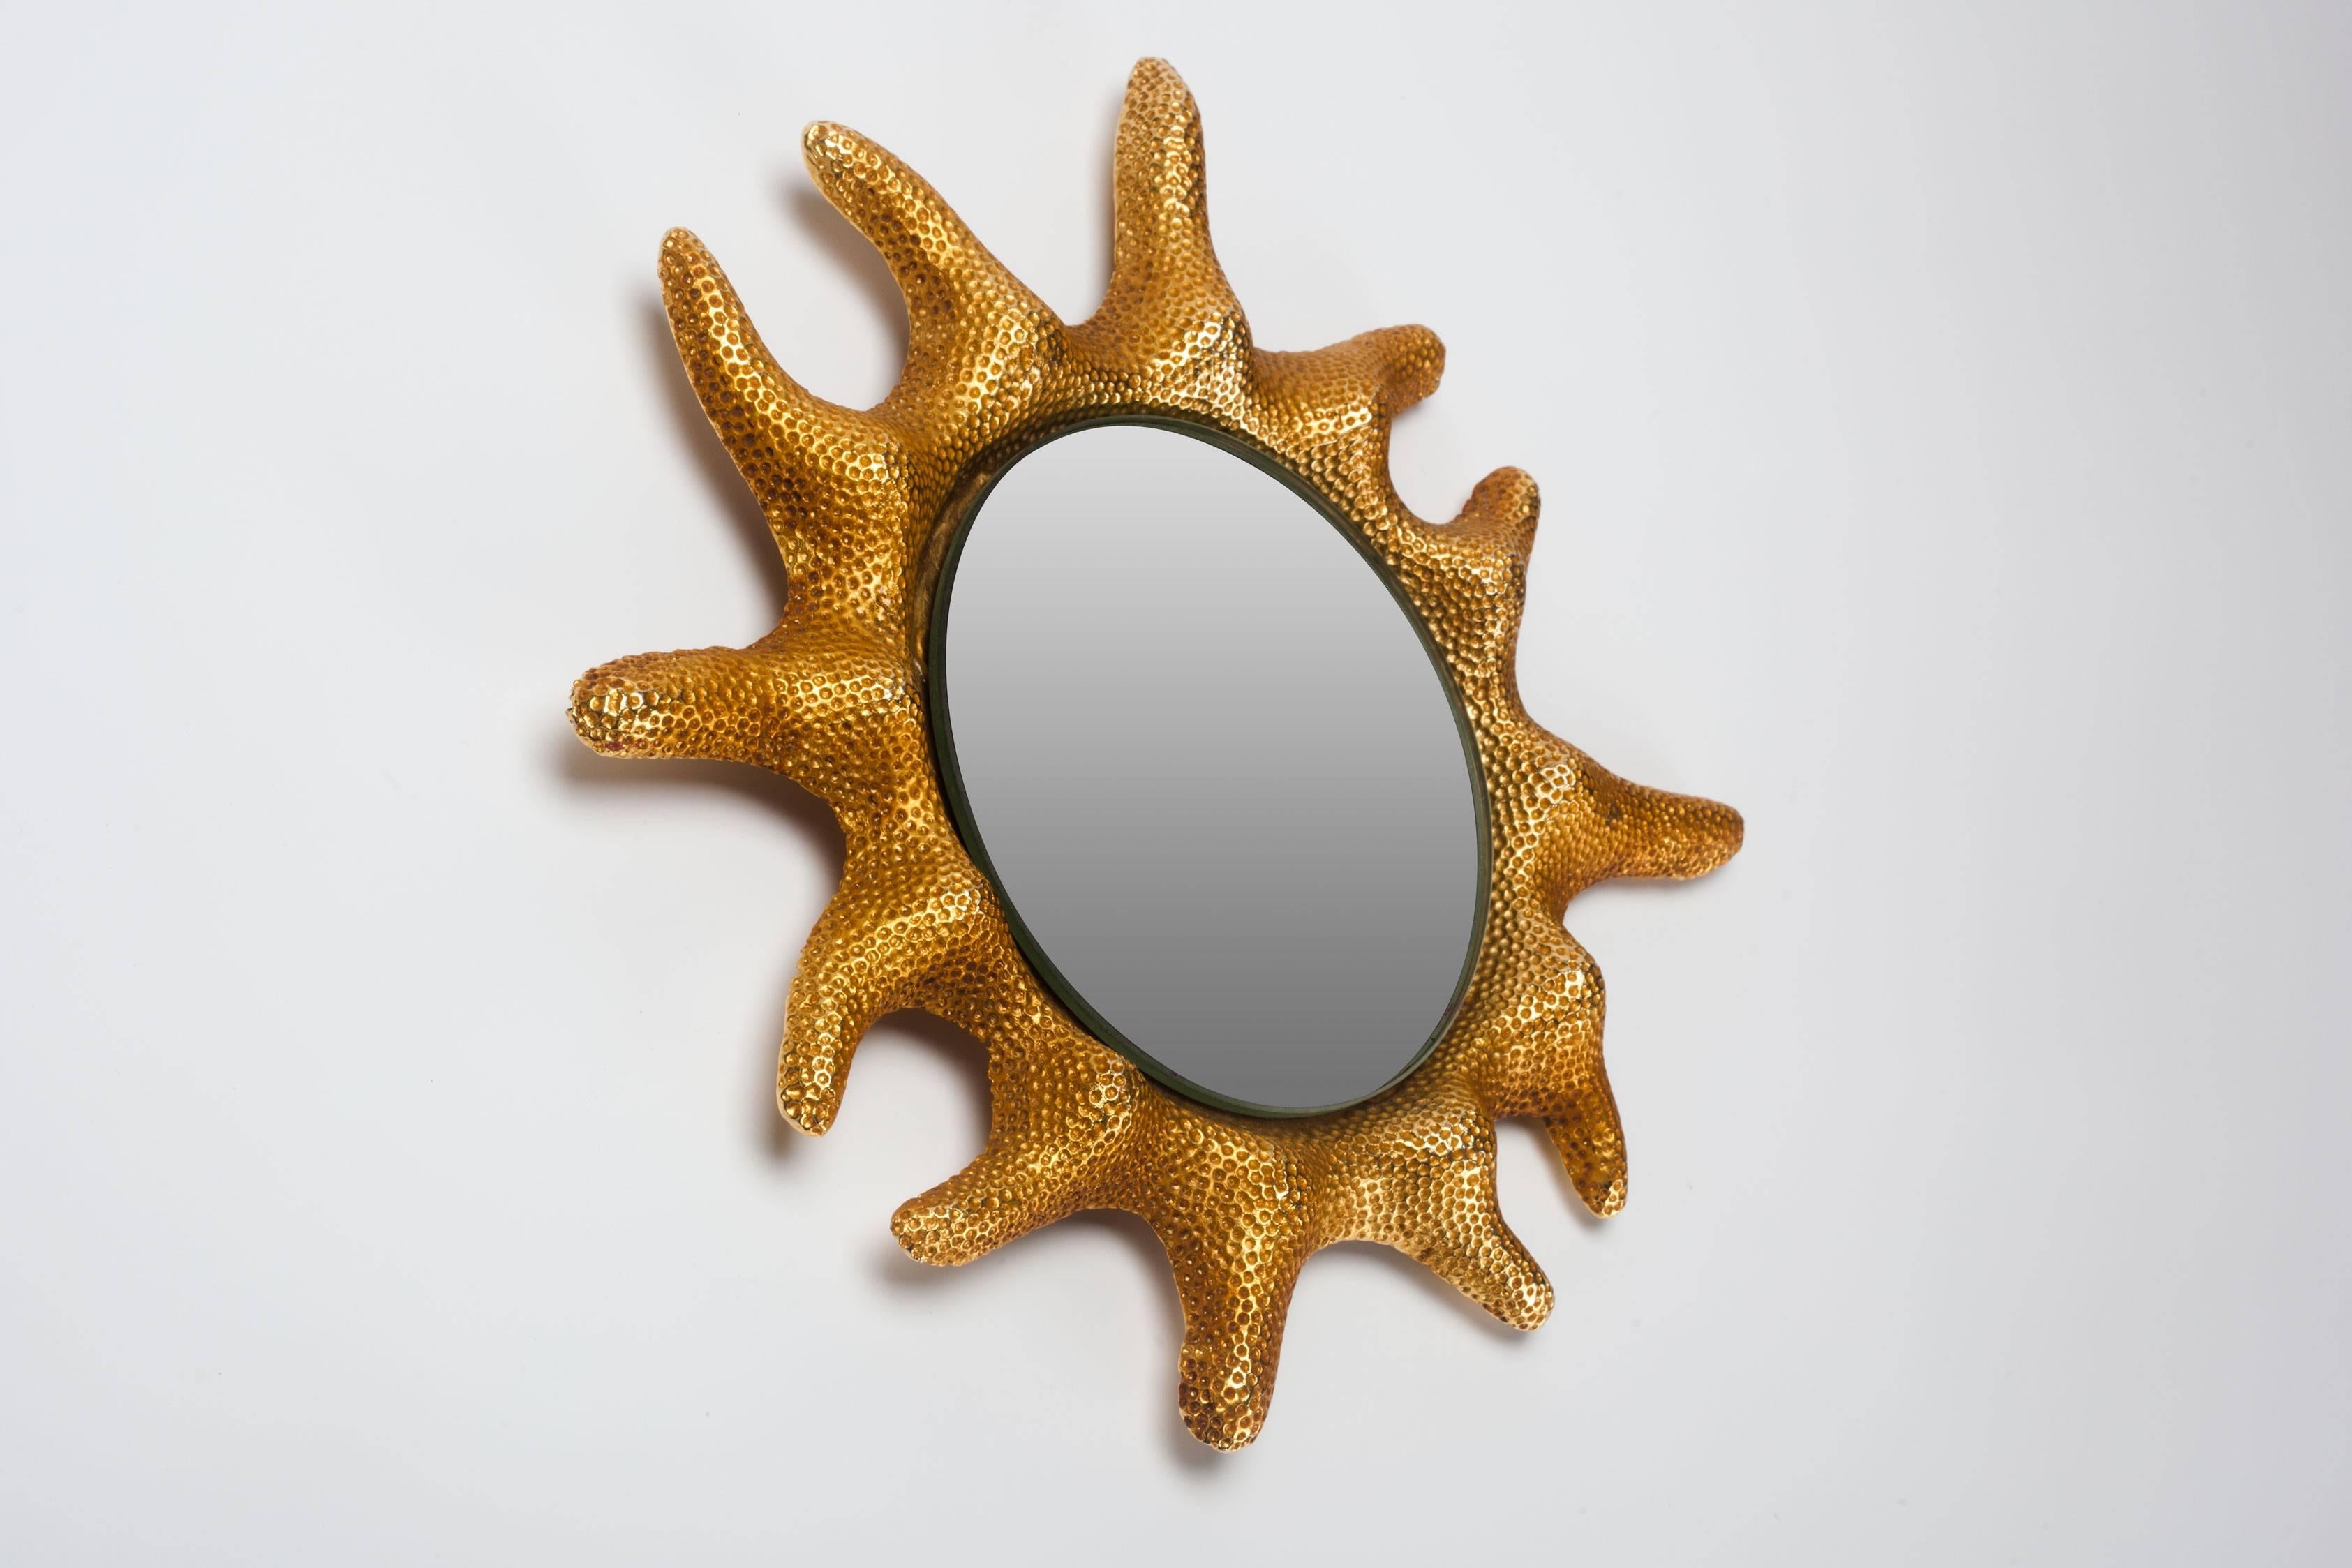 Round wall mirror framed in gilt bronze, made in France in 1995 and designed by Stéphane Galerneau for Fondica. 

The frame's multi-directional appendages evoke the sun, resembling rays of light or licks of flame, while the fine texture of the